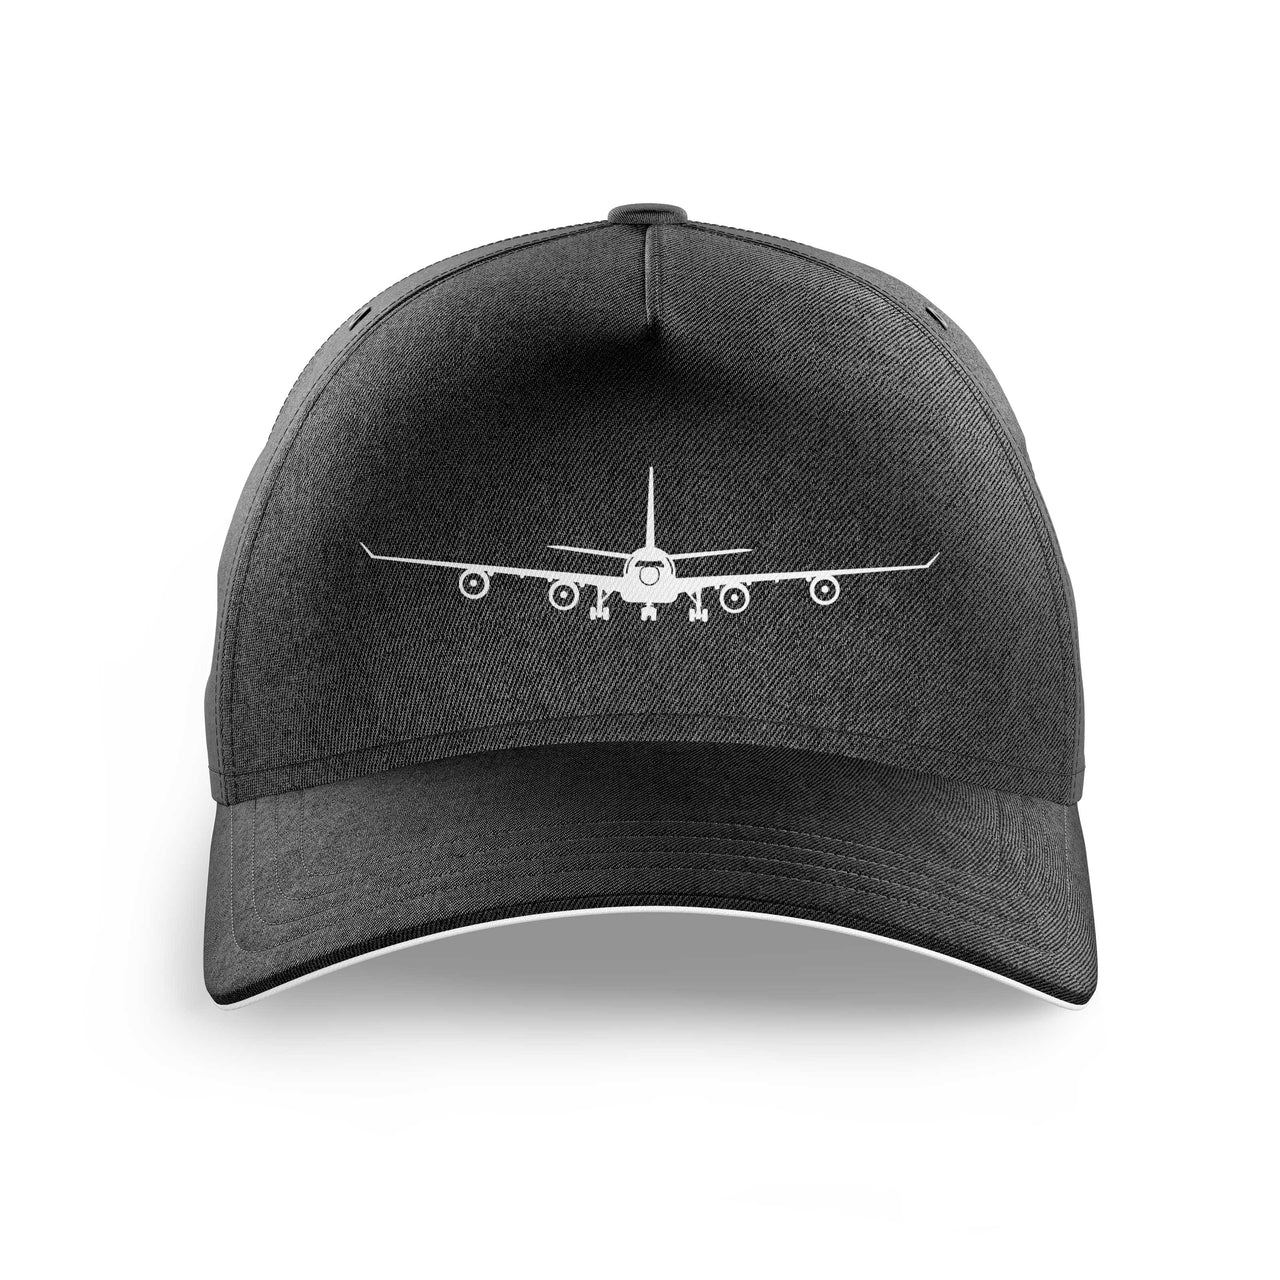 Airbus A340 Silhouette Printed Hats